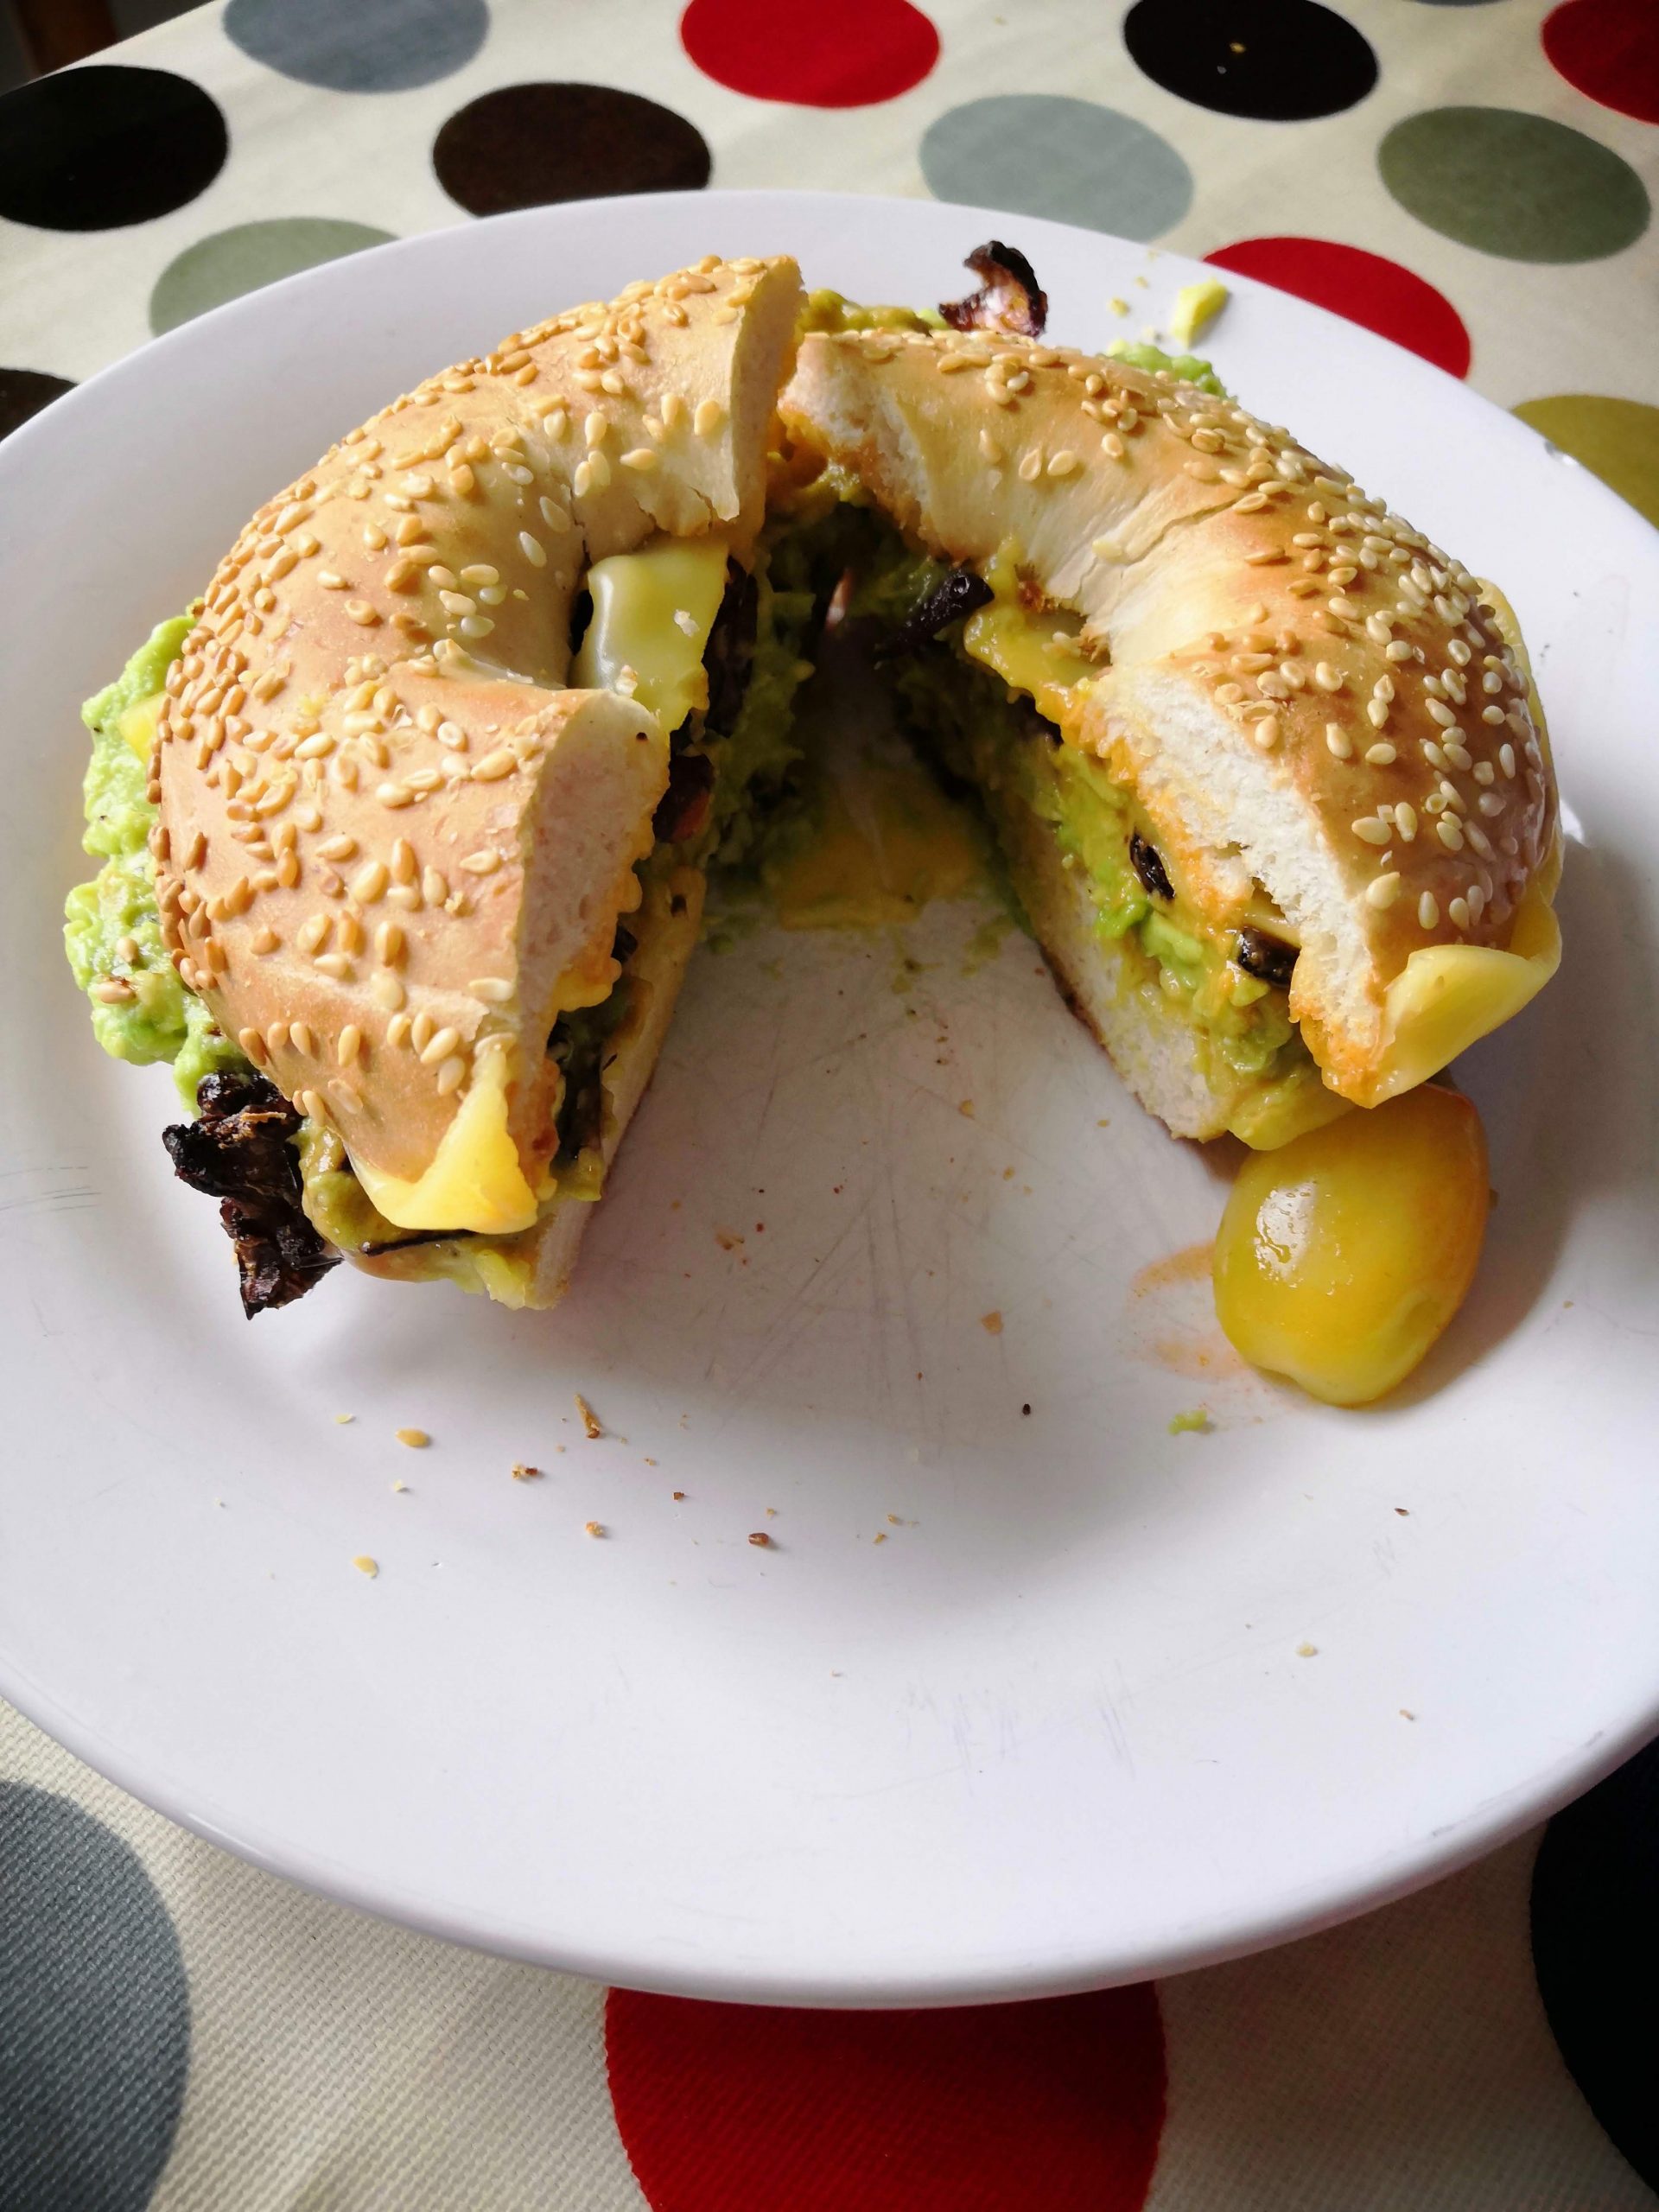 Vegan avocado, lettuce, tomato and cheese bagel on a plate